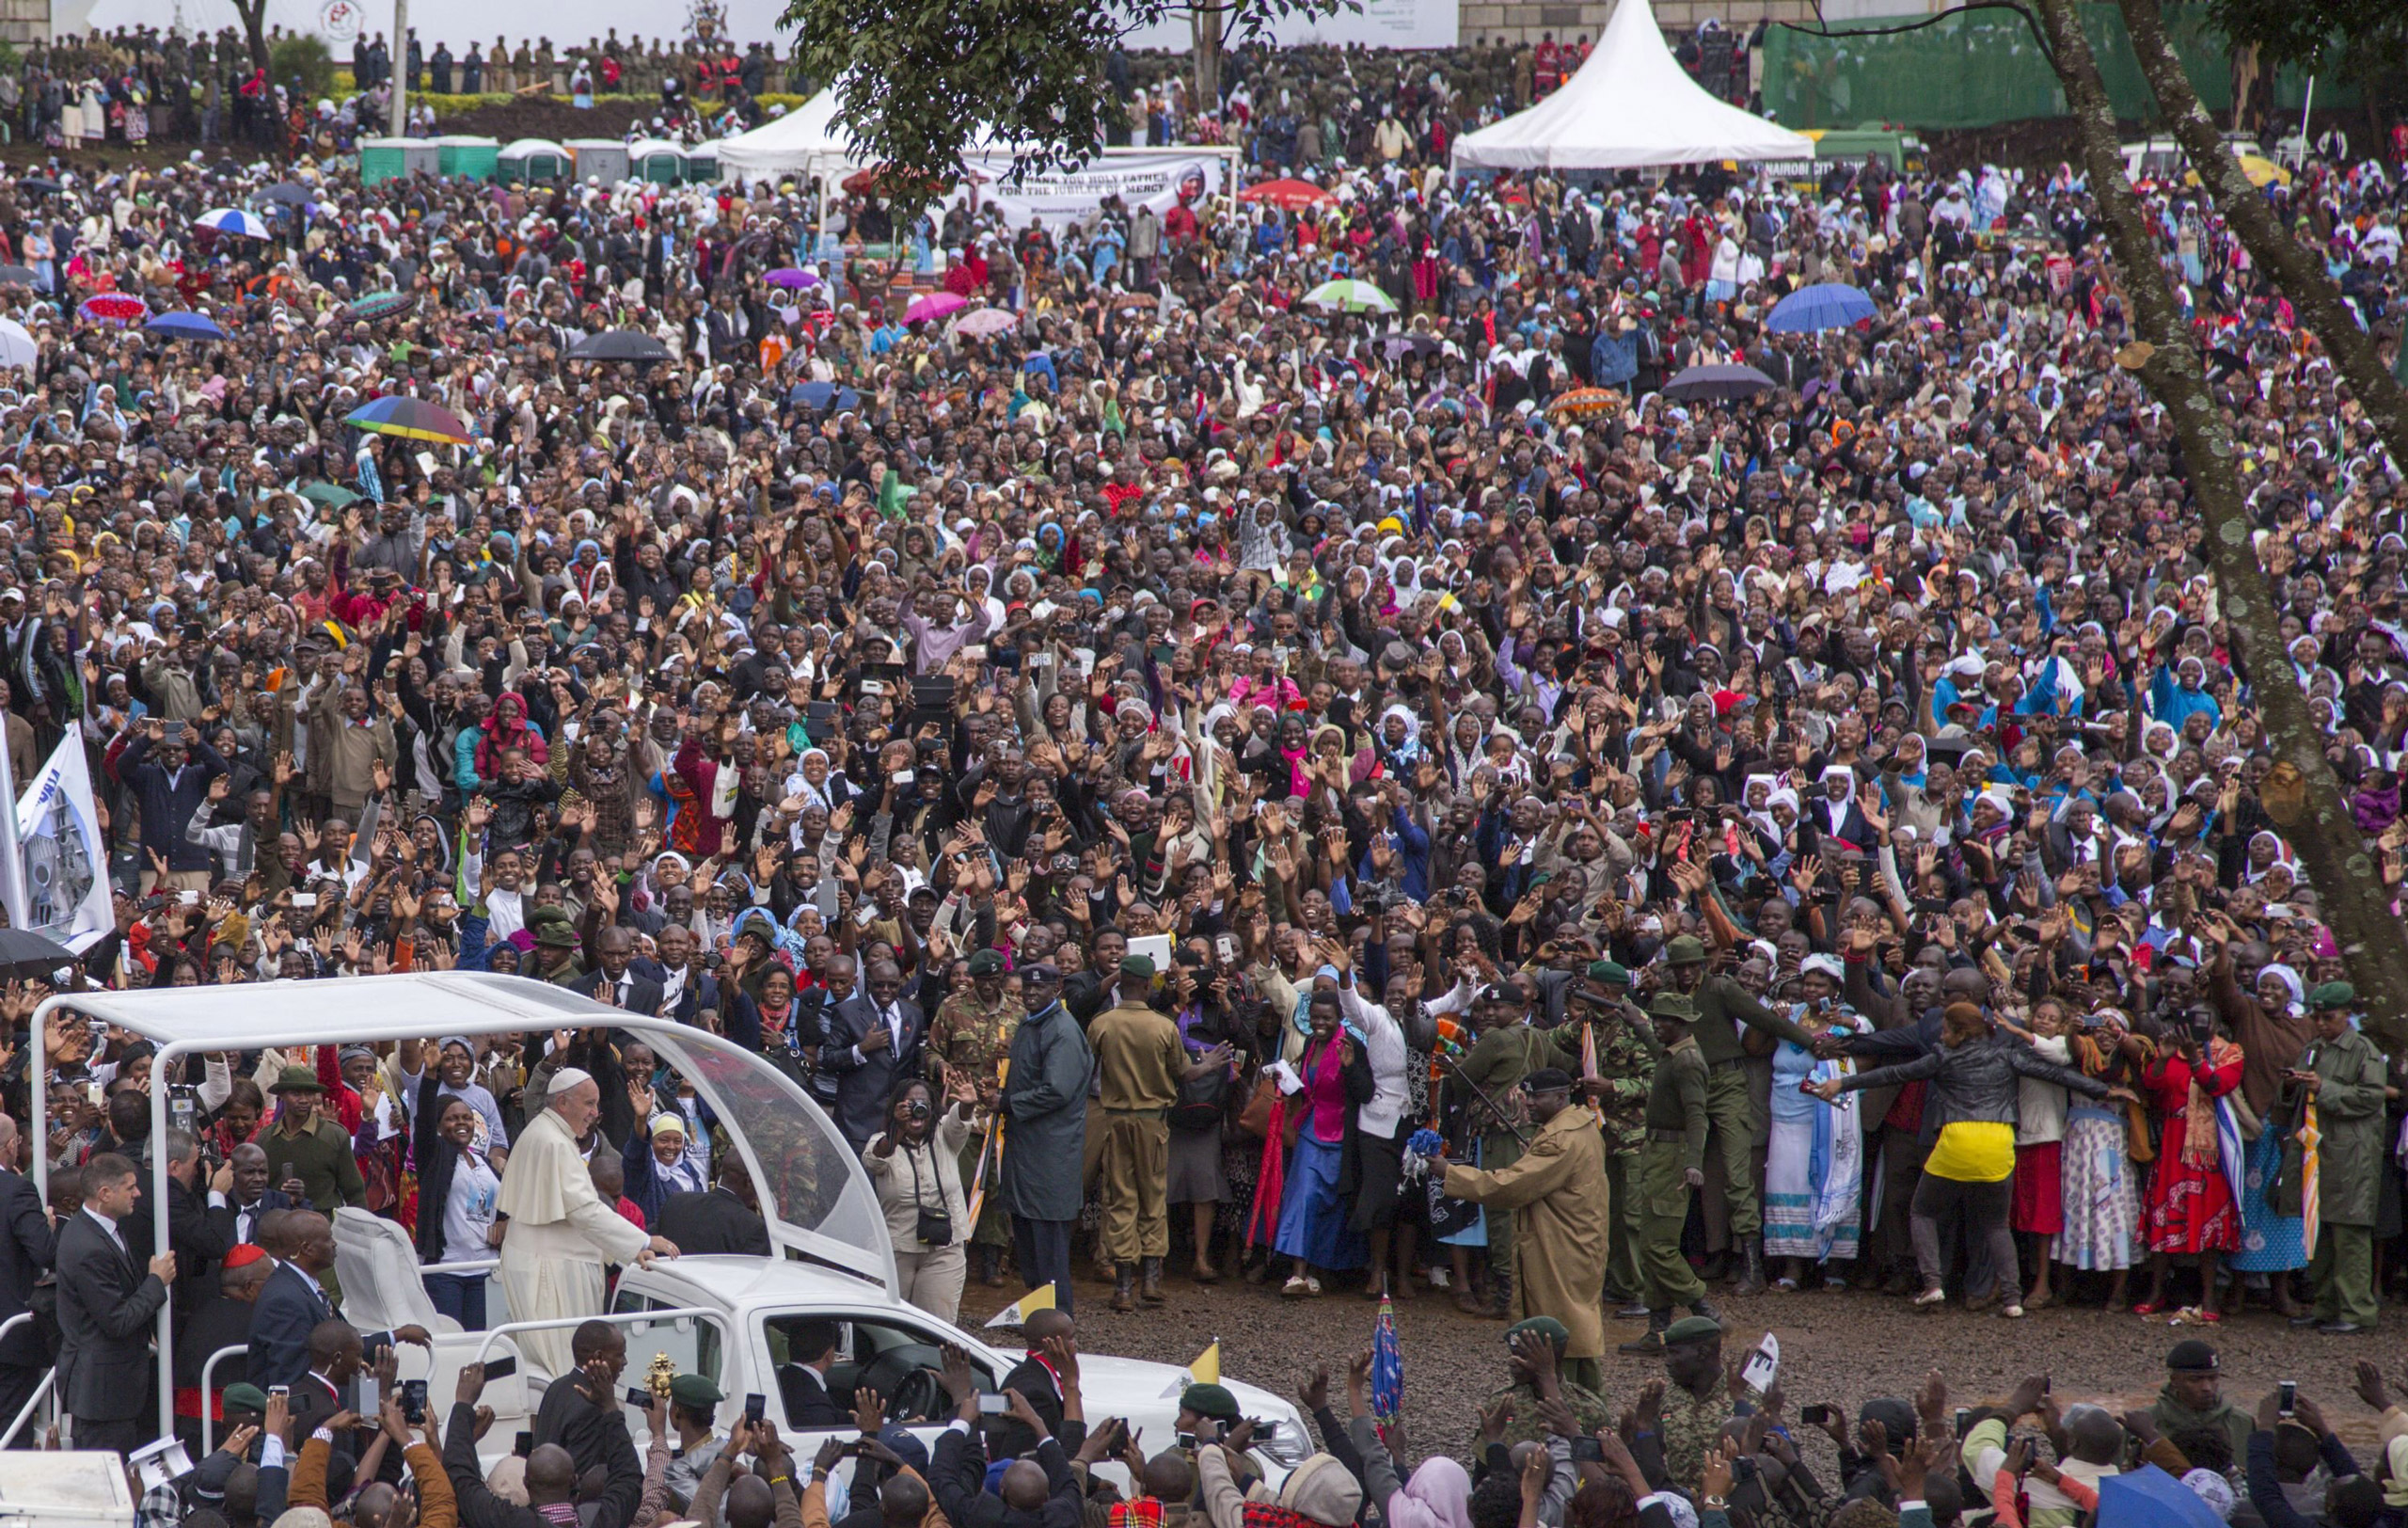 Pope Francis waves to the crowd as he arrives to deliver an open-air mass at the University of Nairobi on Nov. 26, 2015.